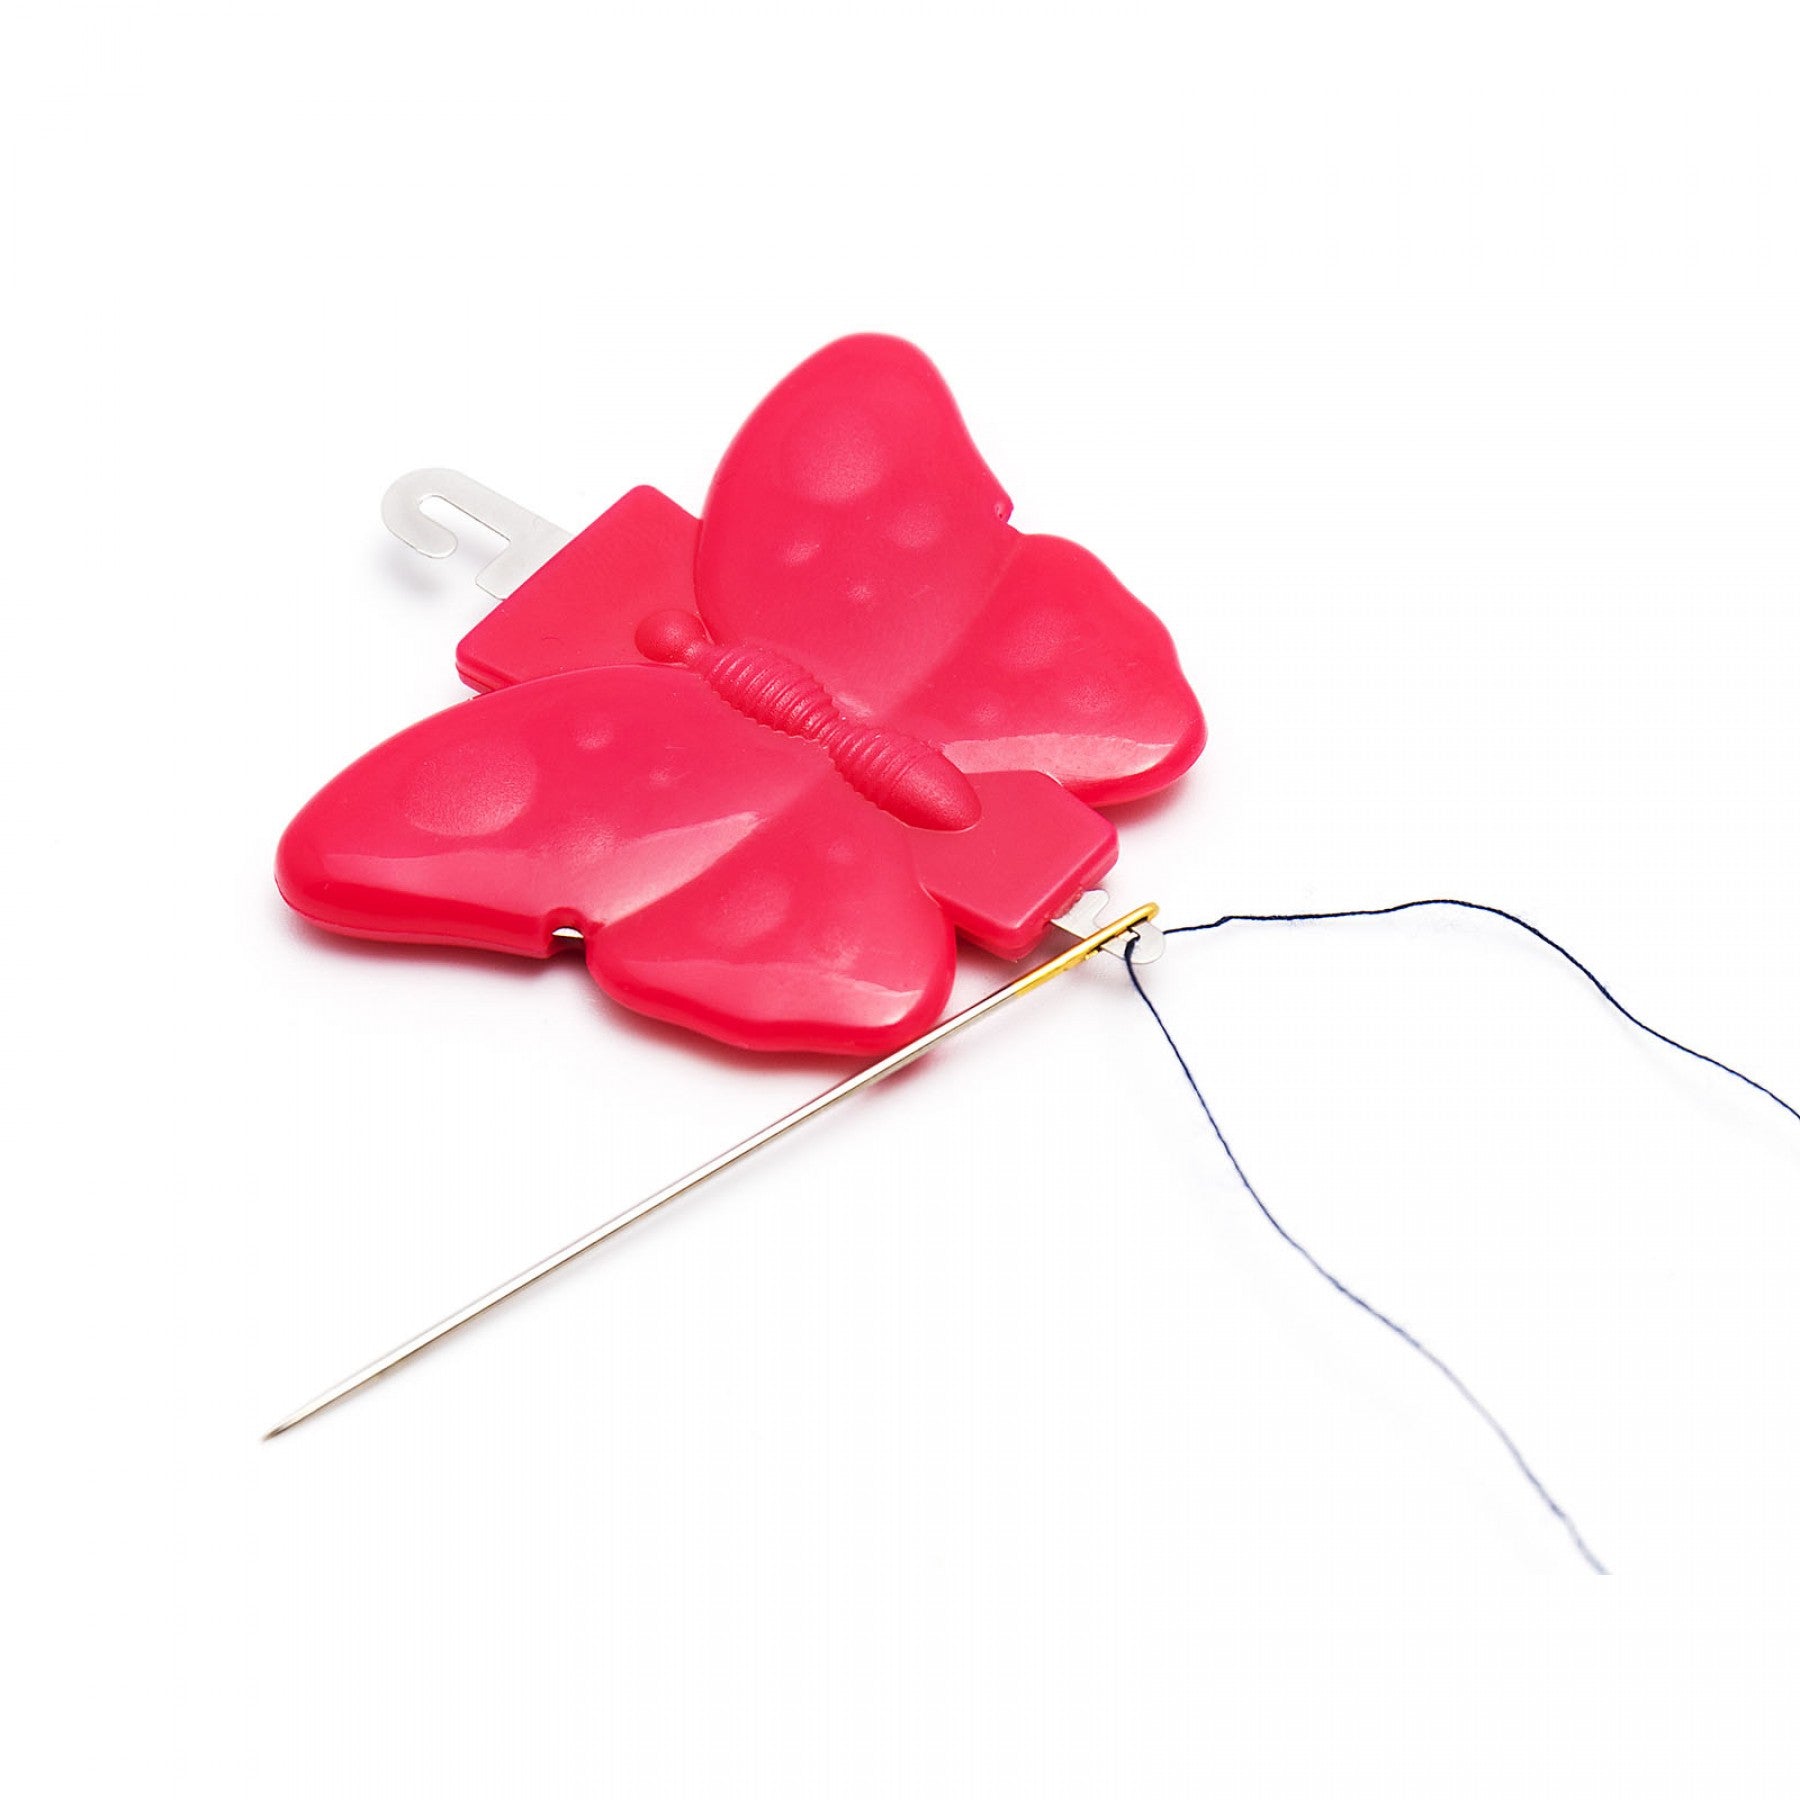 Filament Style Needle Threaders – Snuggly Monkey